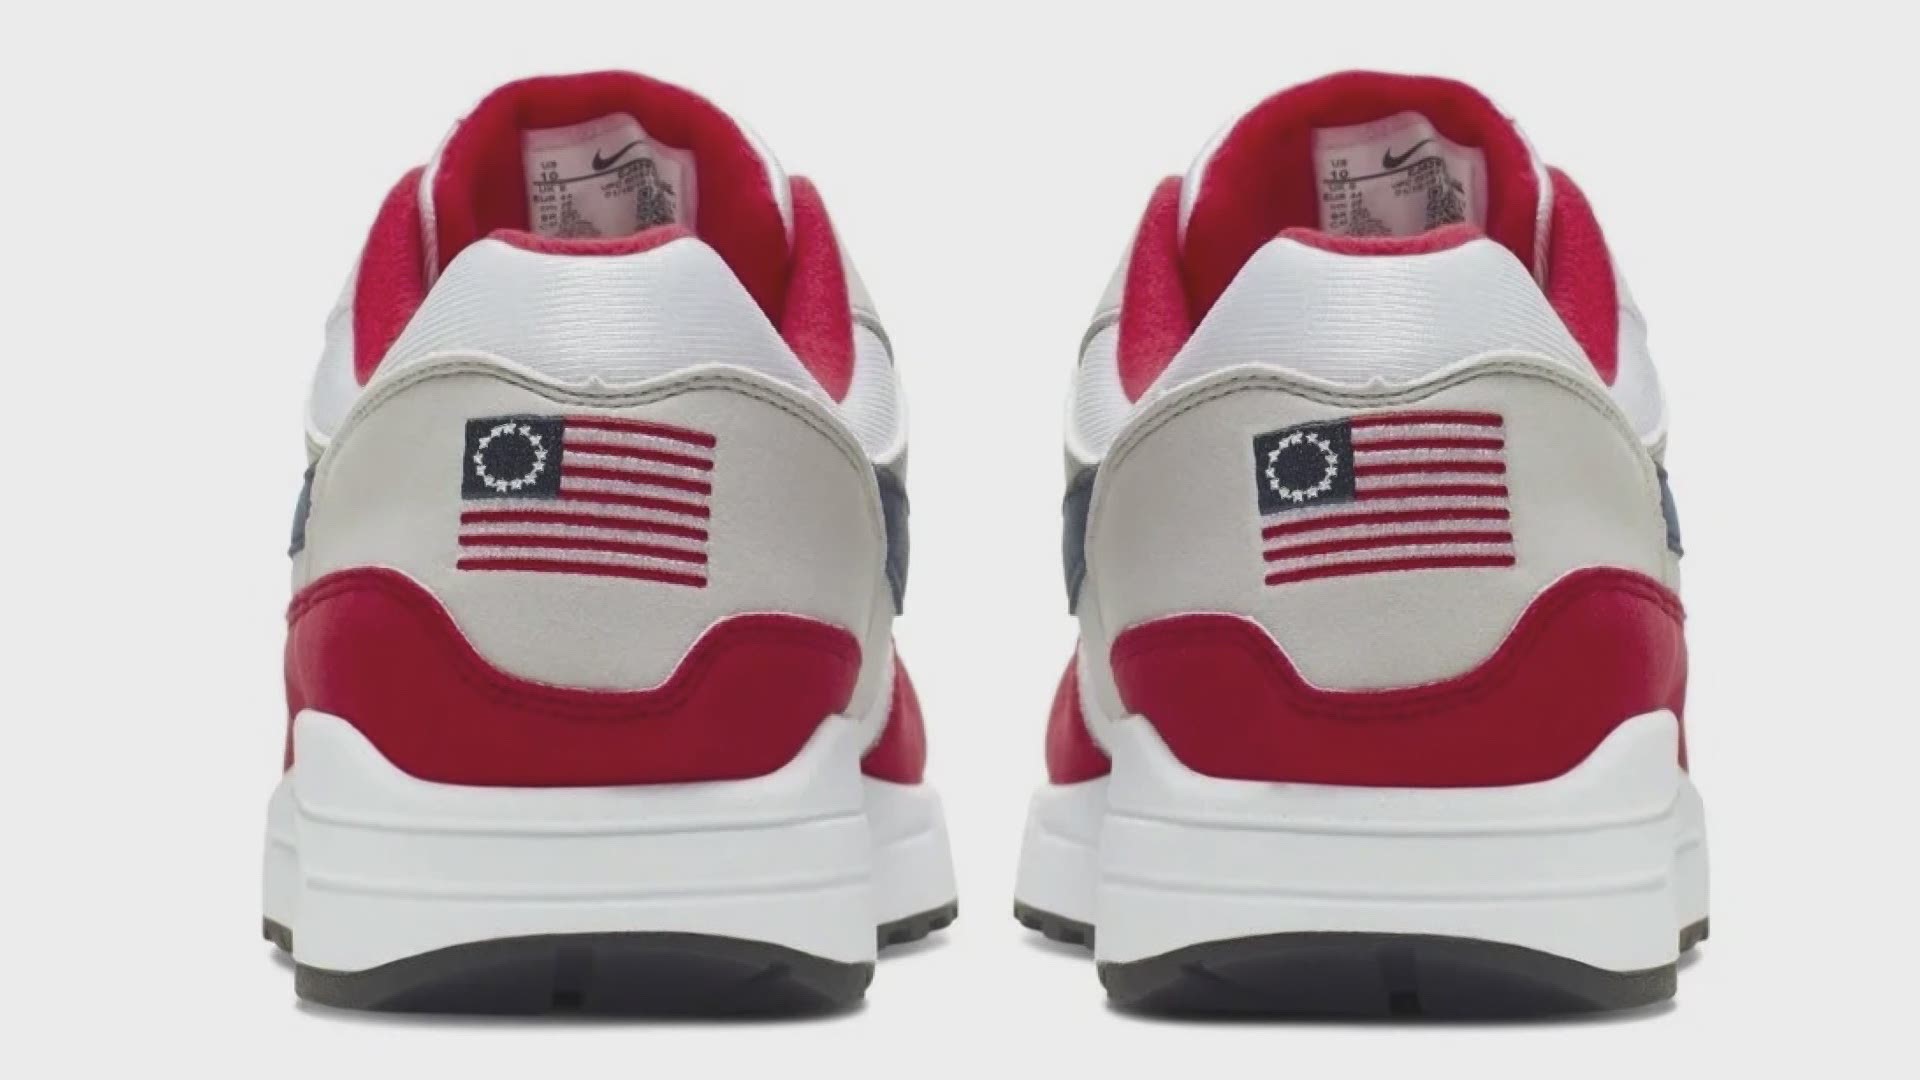 You might have heard about Nike pulling new sneakers meant for the Fourth of July holiday. The shoes' launch was canceled Monday after Colin Kaepernick and others criticized Nike for including "the Betsy Ross flag" in the design. But, why is the flag controversial? Let's Connect the Dots!